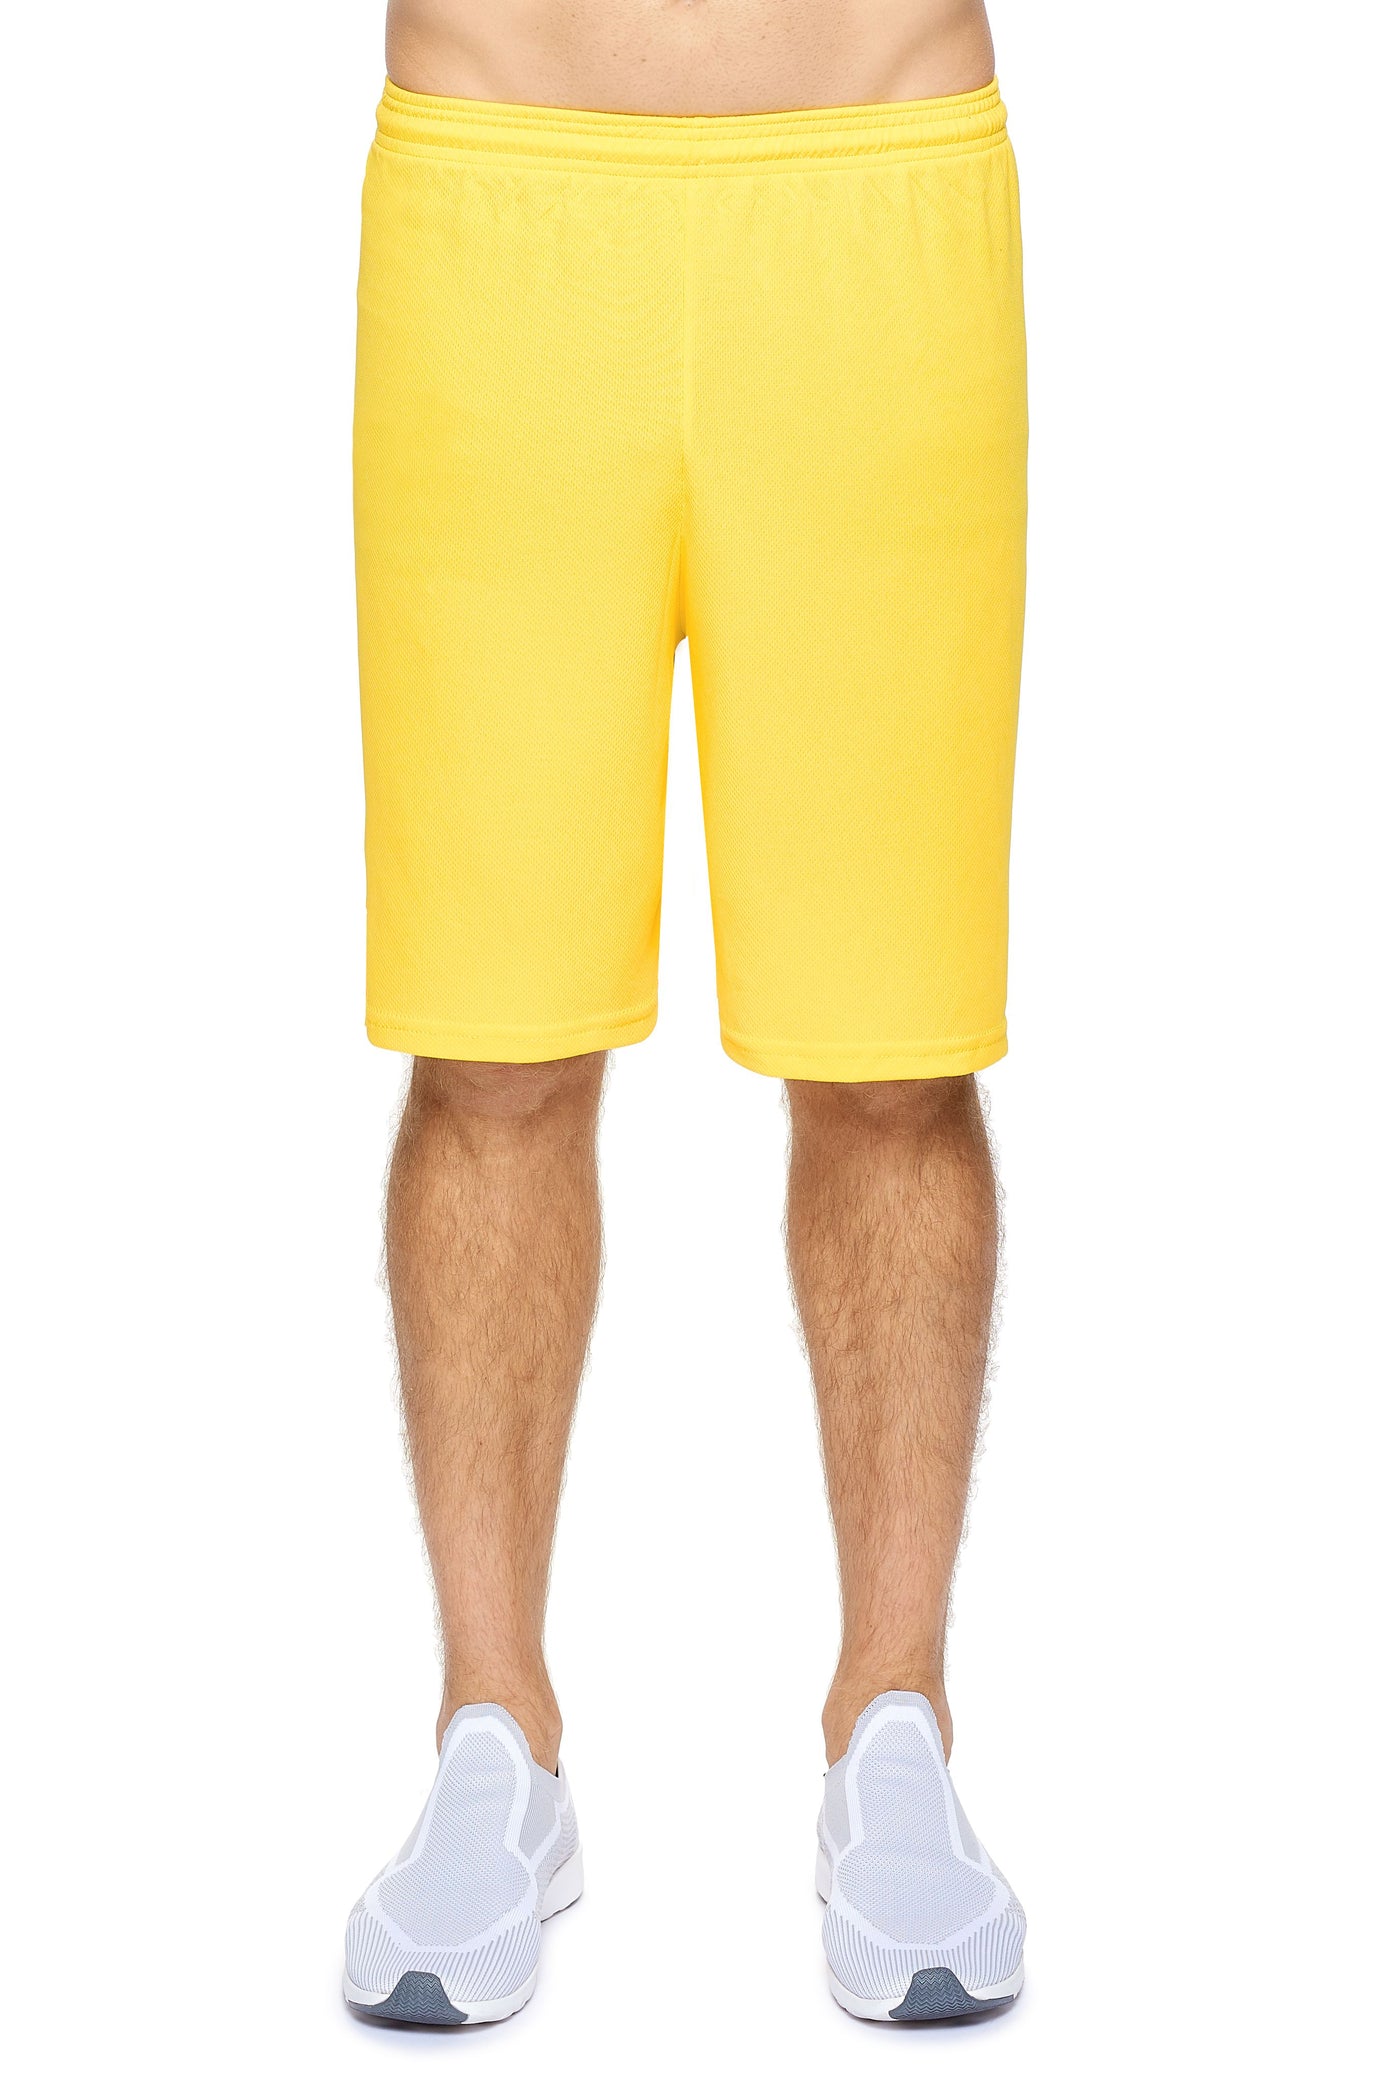 Oxymesh™ Training Shorts 🇺🇸 - Expert Brand Apparel#color_bright-yellow